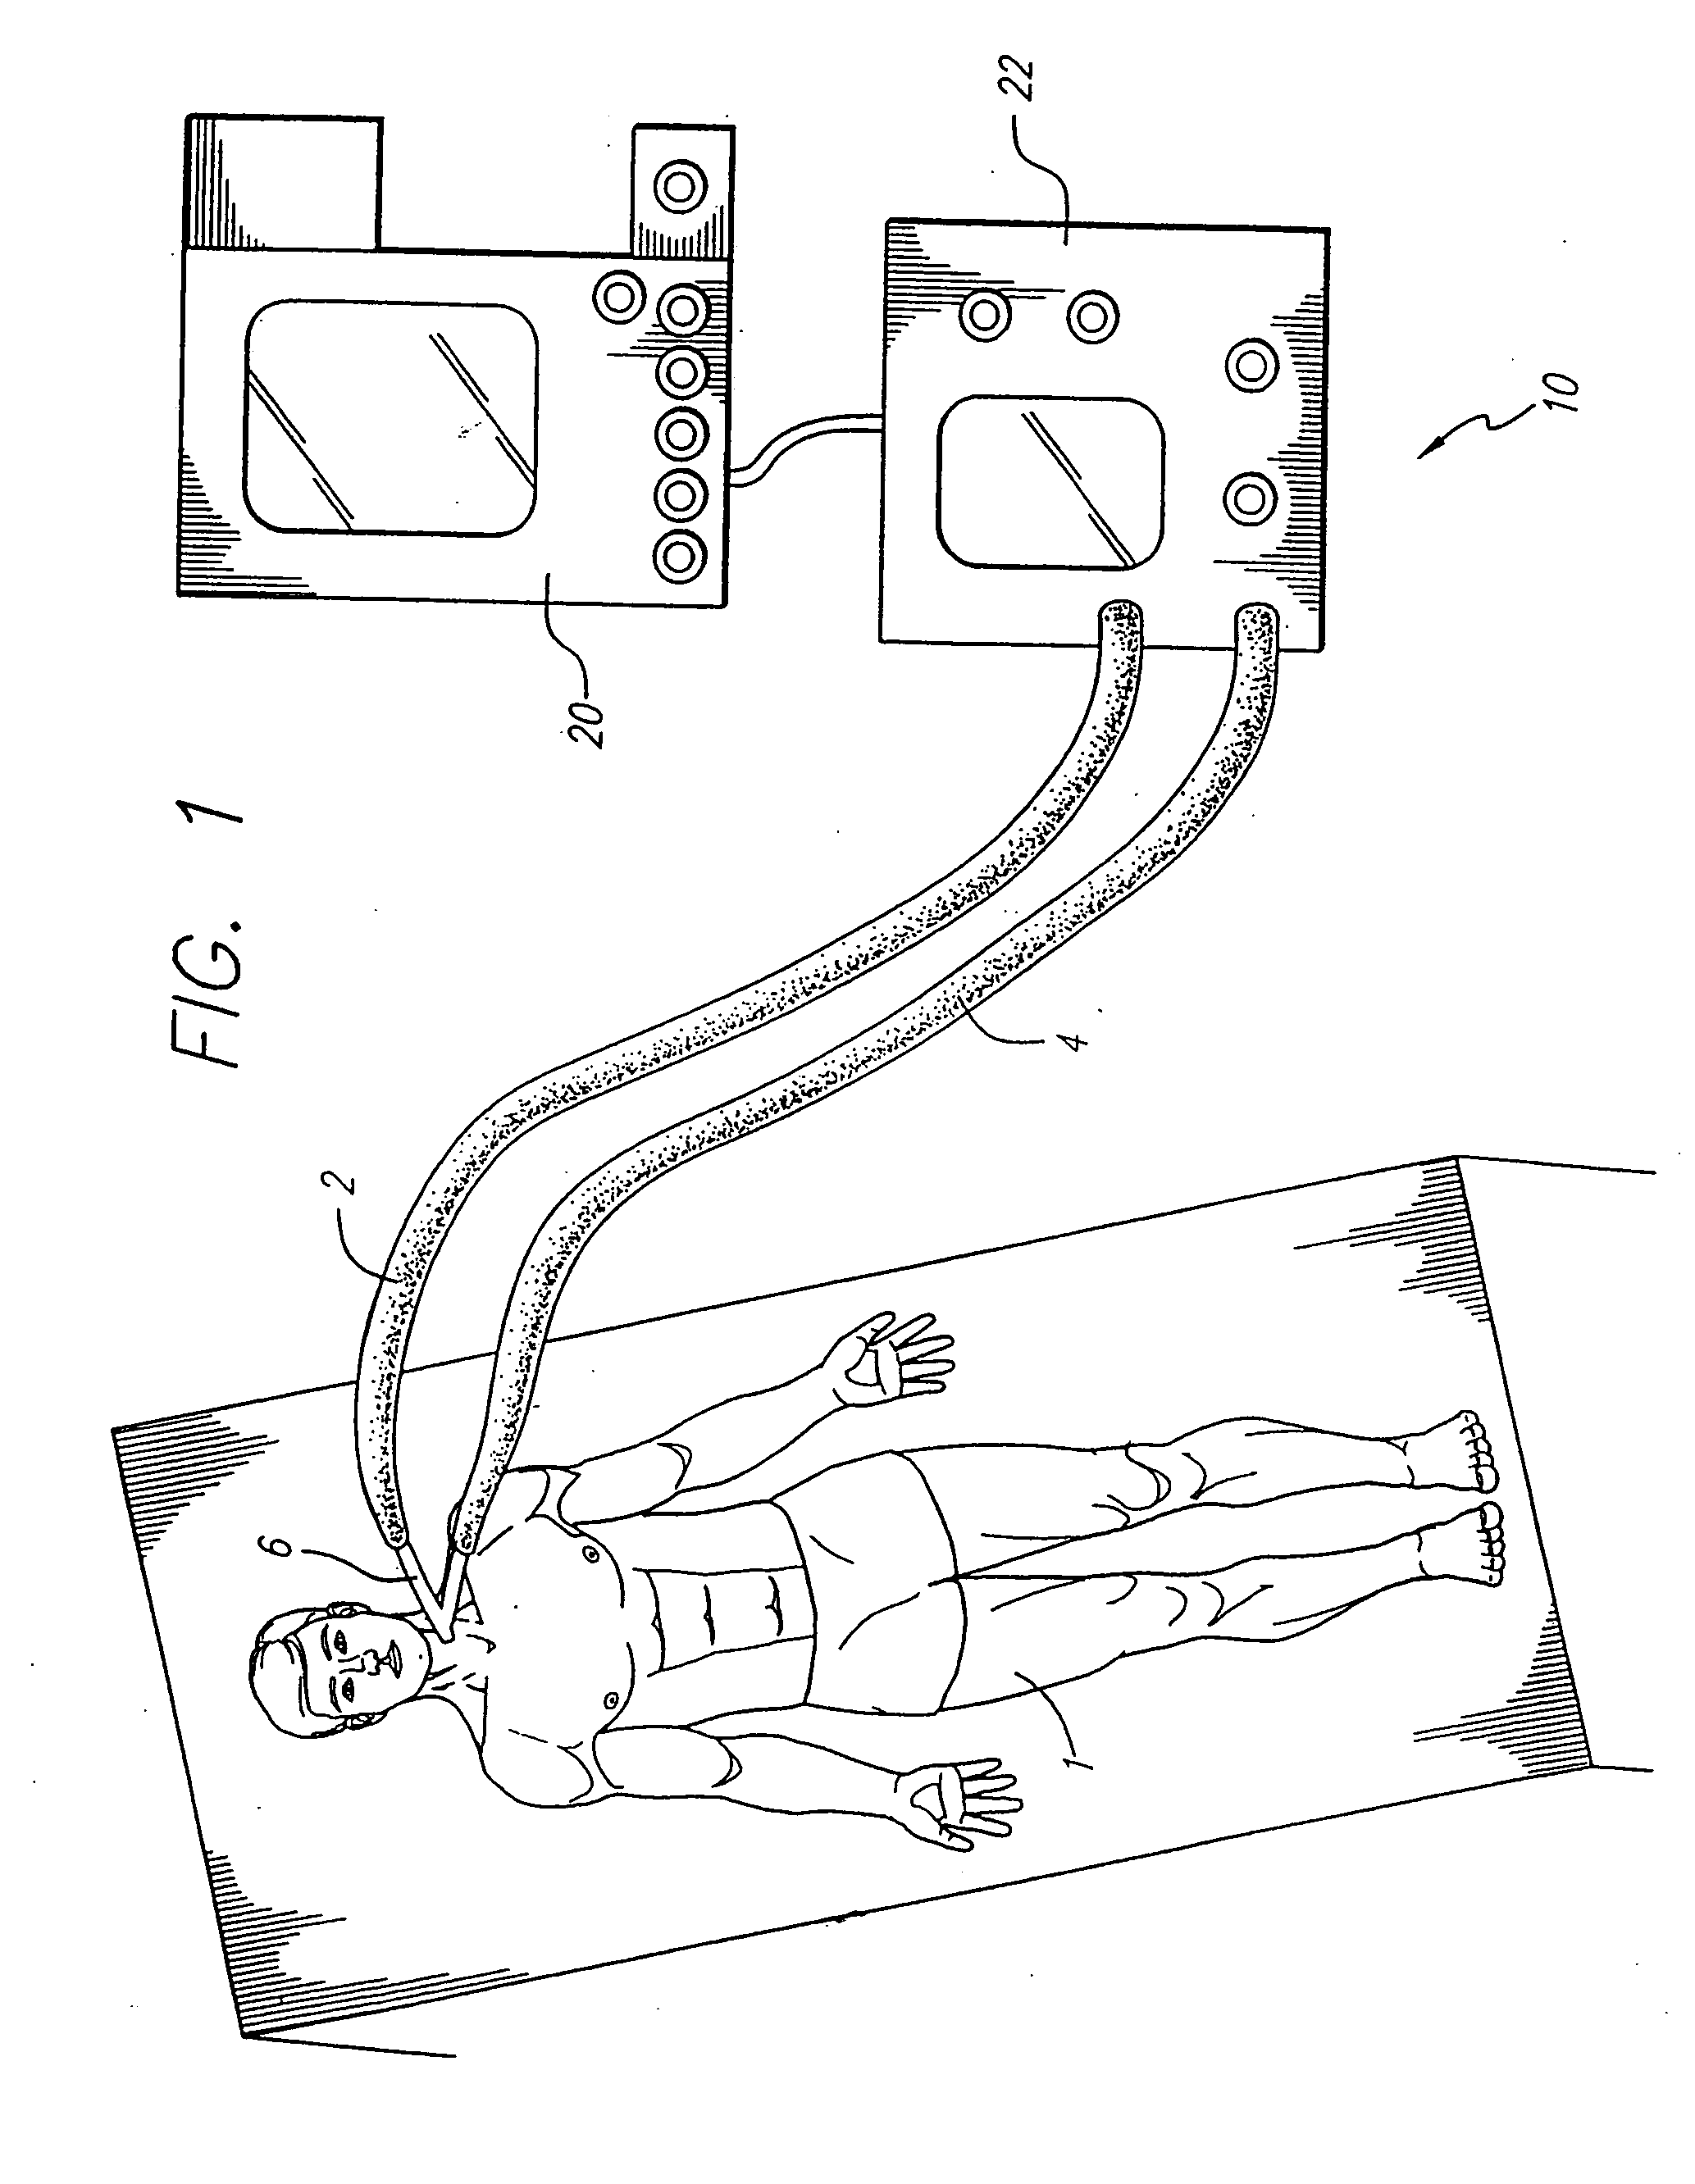 Ventilator breath display and graphic user interface